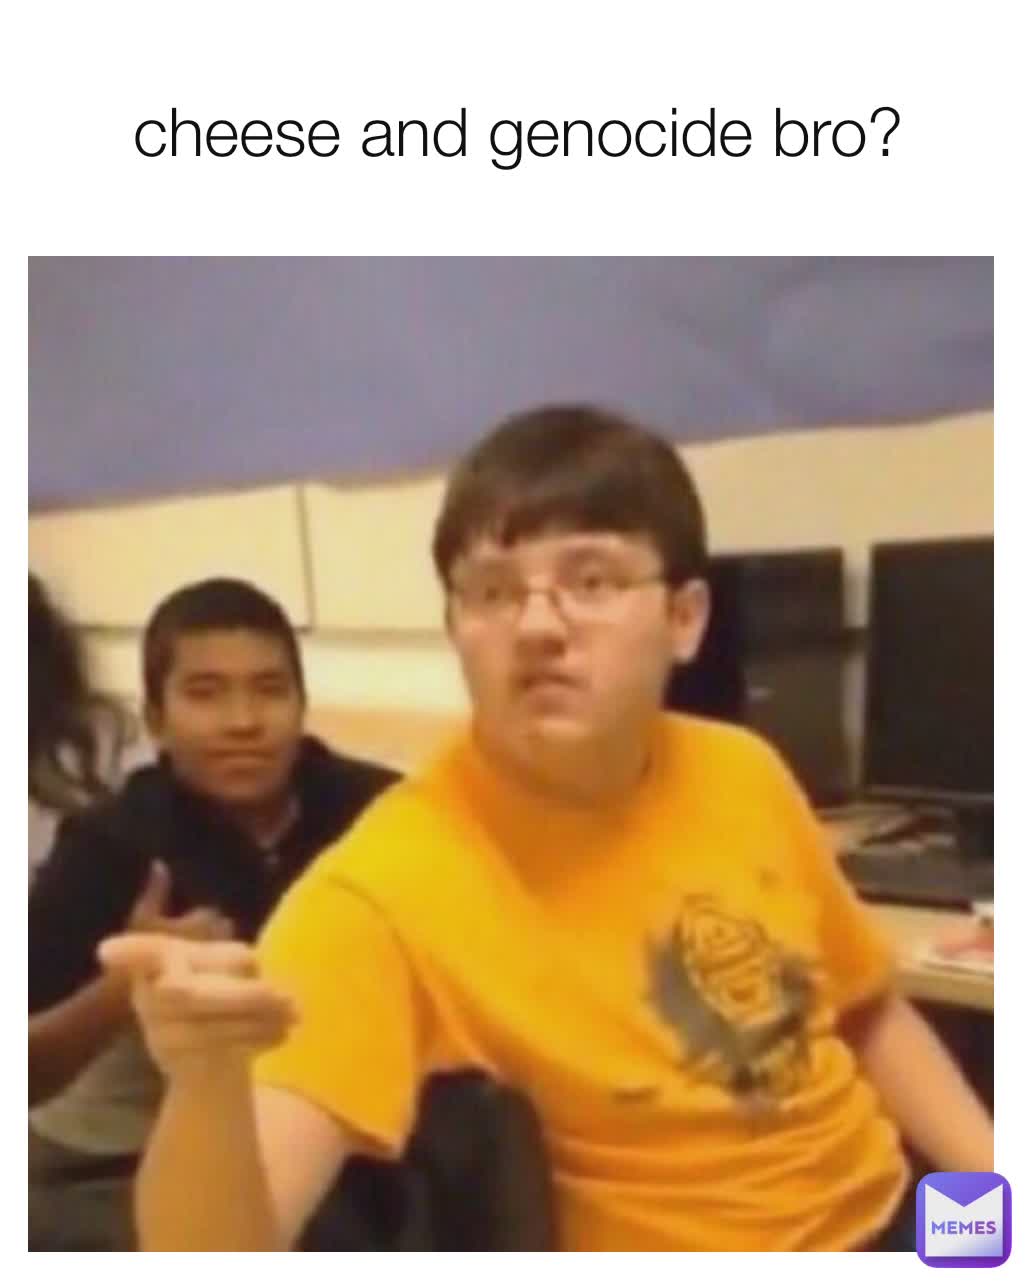 cheese and genocide bro?